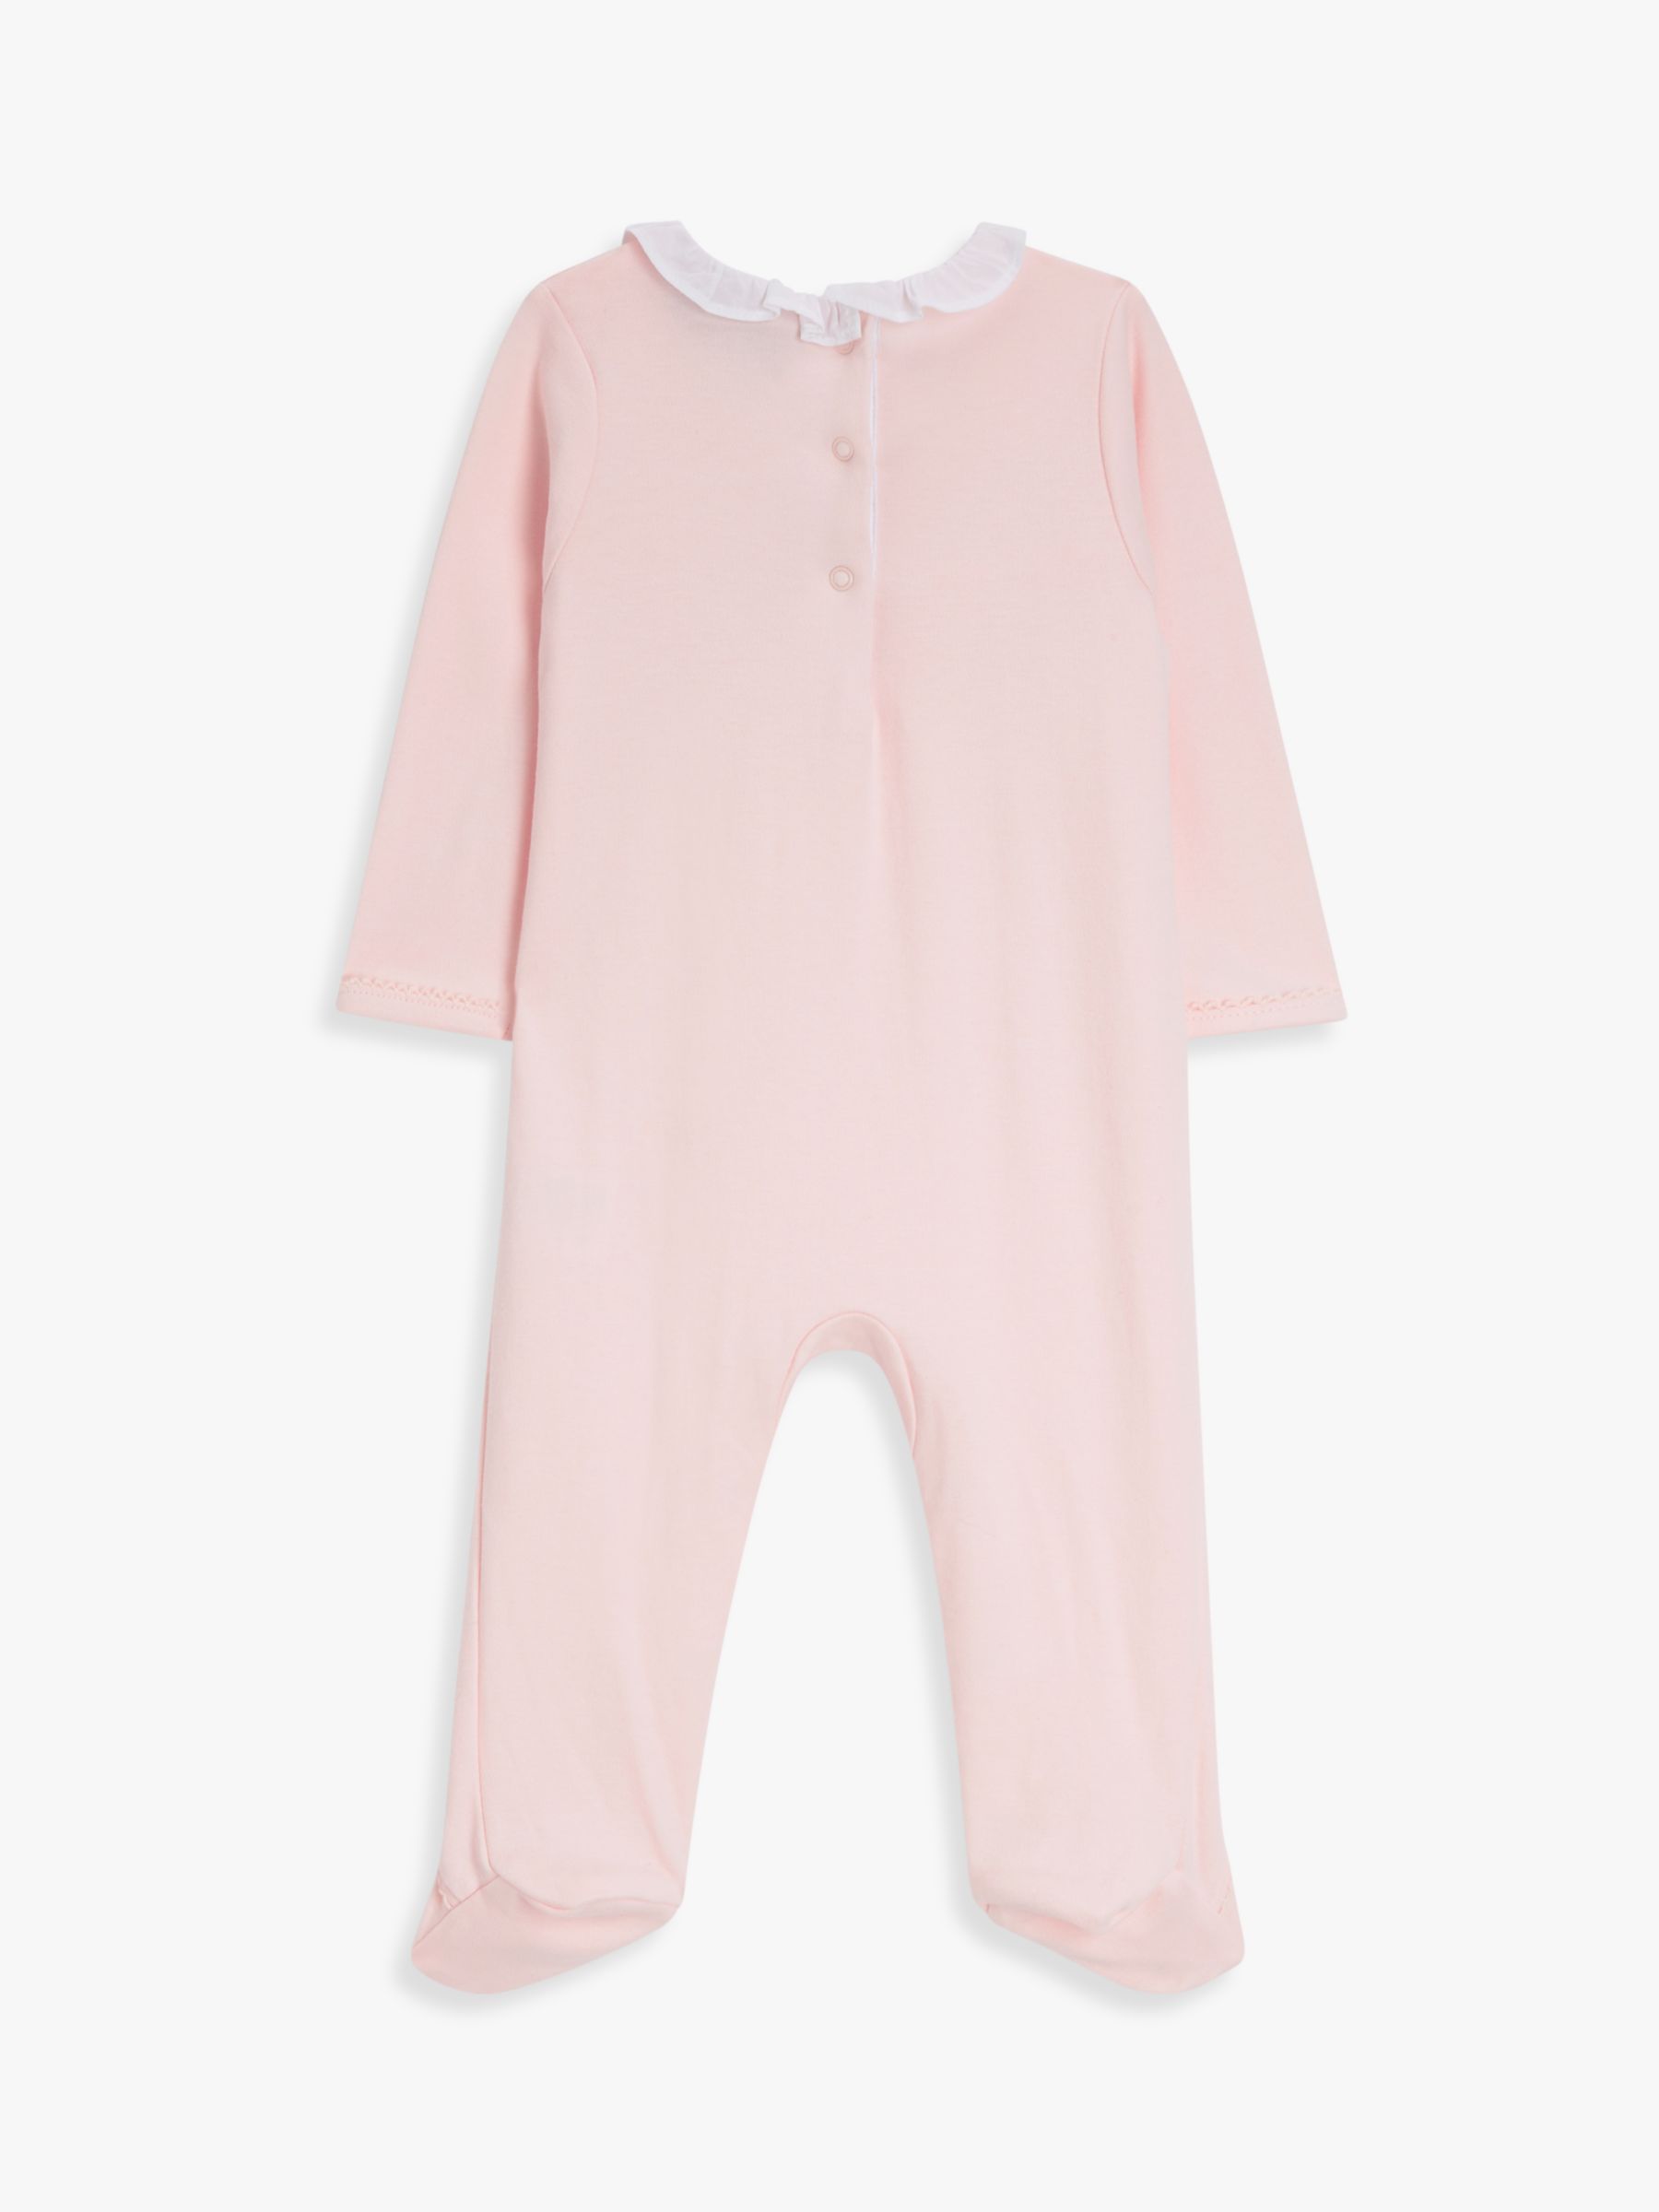 John Lewis Heirloom Collection Baby Pima Cotton Frill Smocked Sleepsuit, Pink, 0-3 months